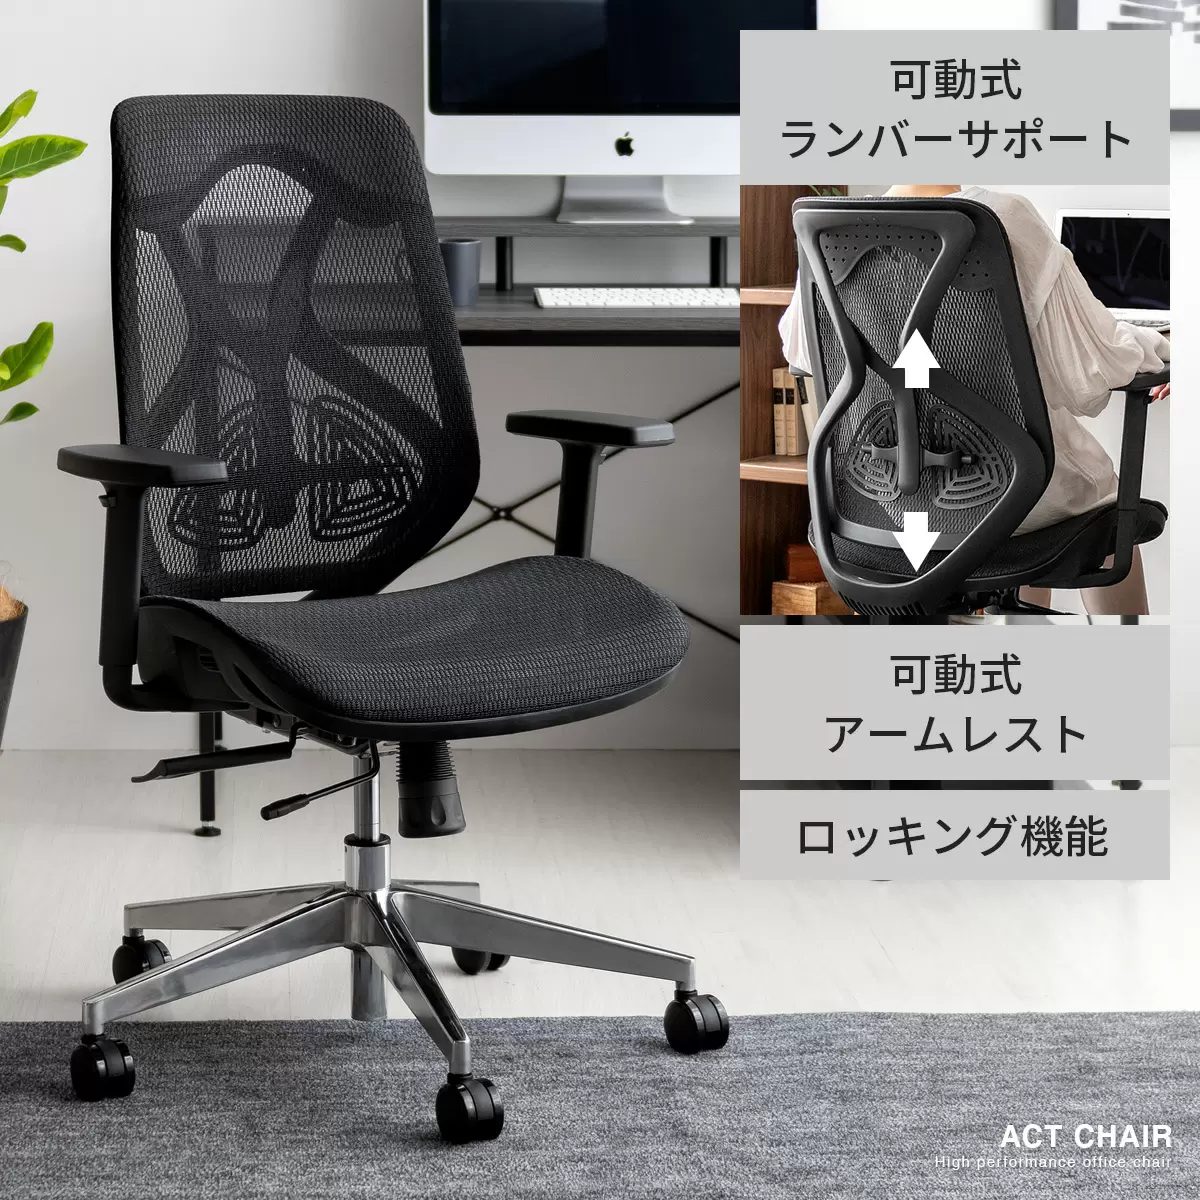 ACT CHAIR（アクトチェア）